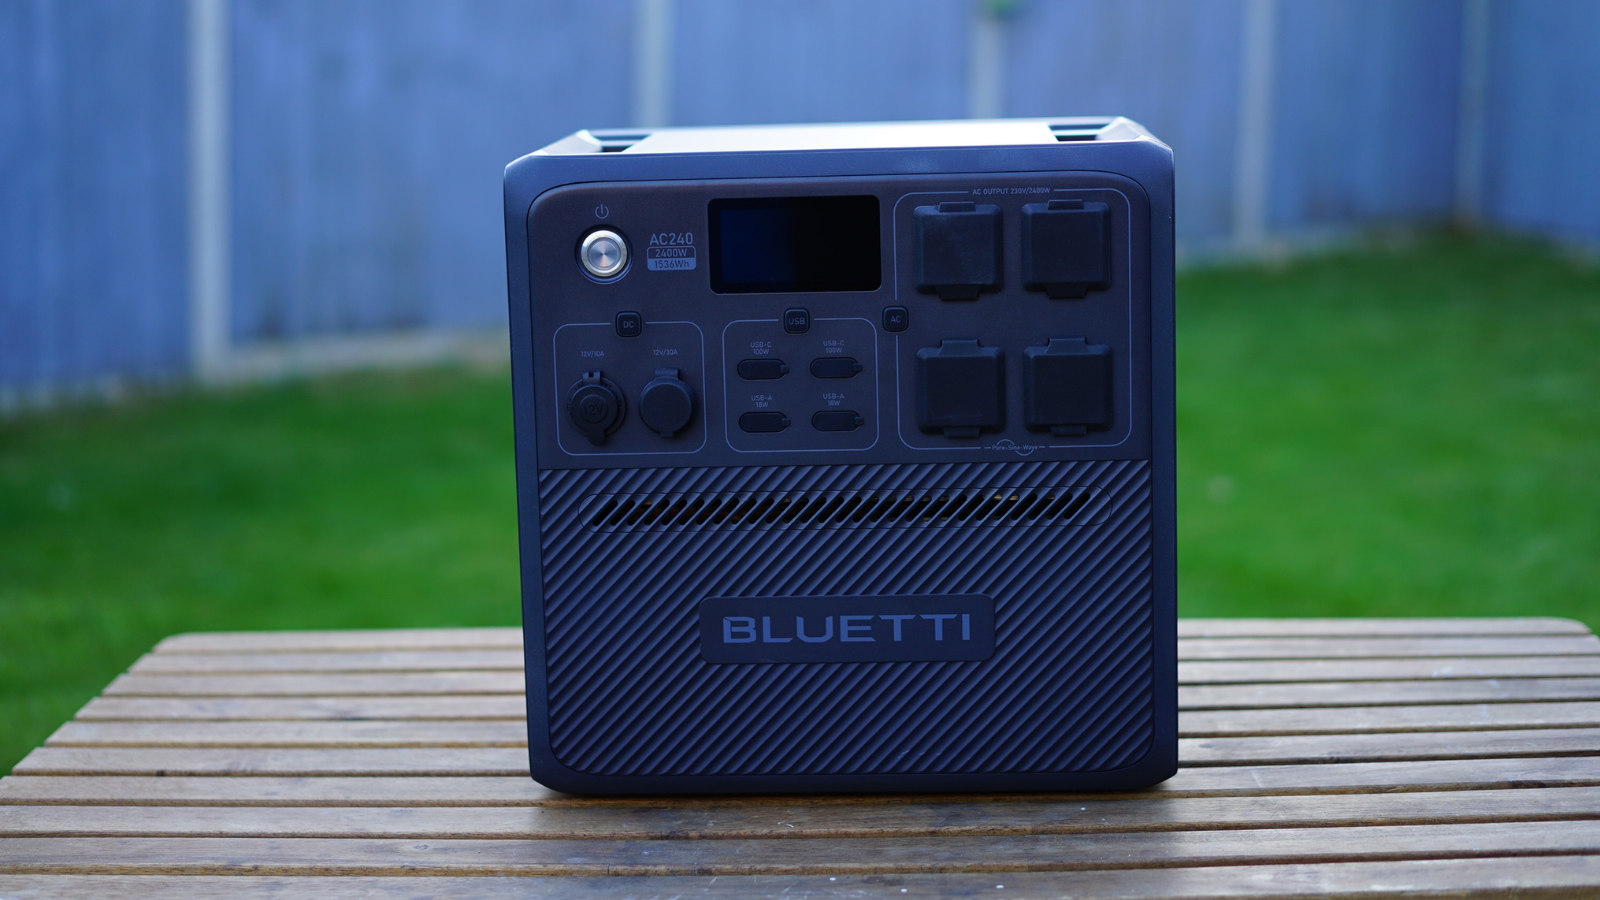 Bluetti AC240 portable power station review